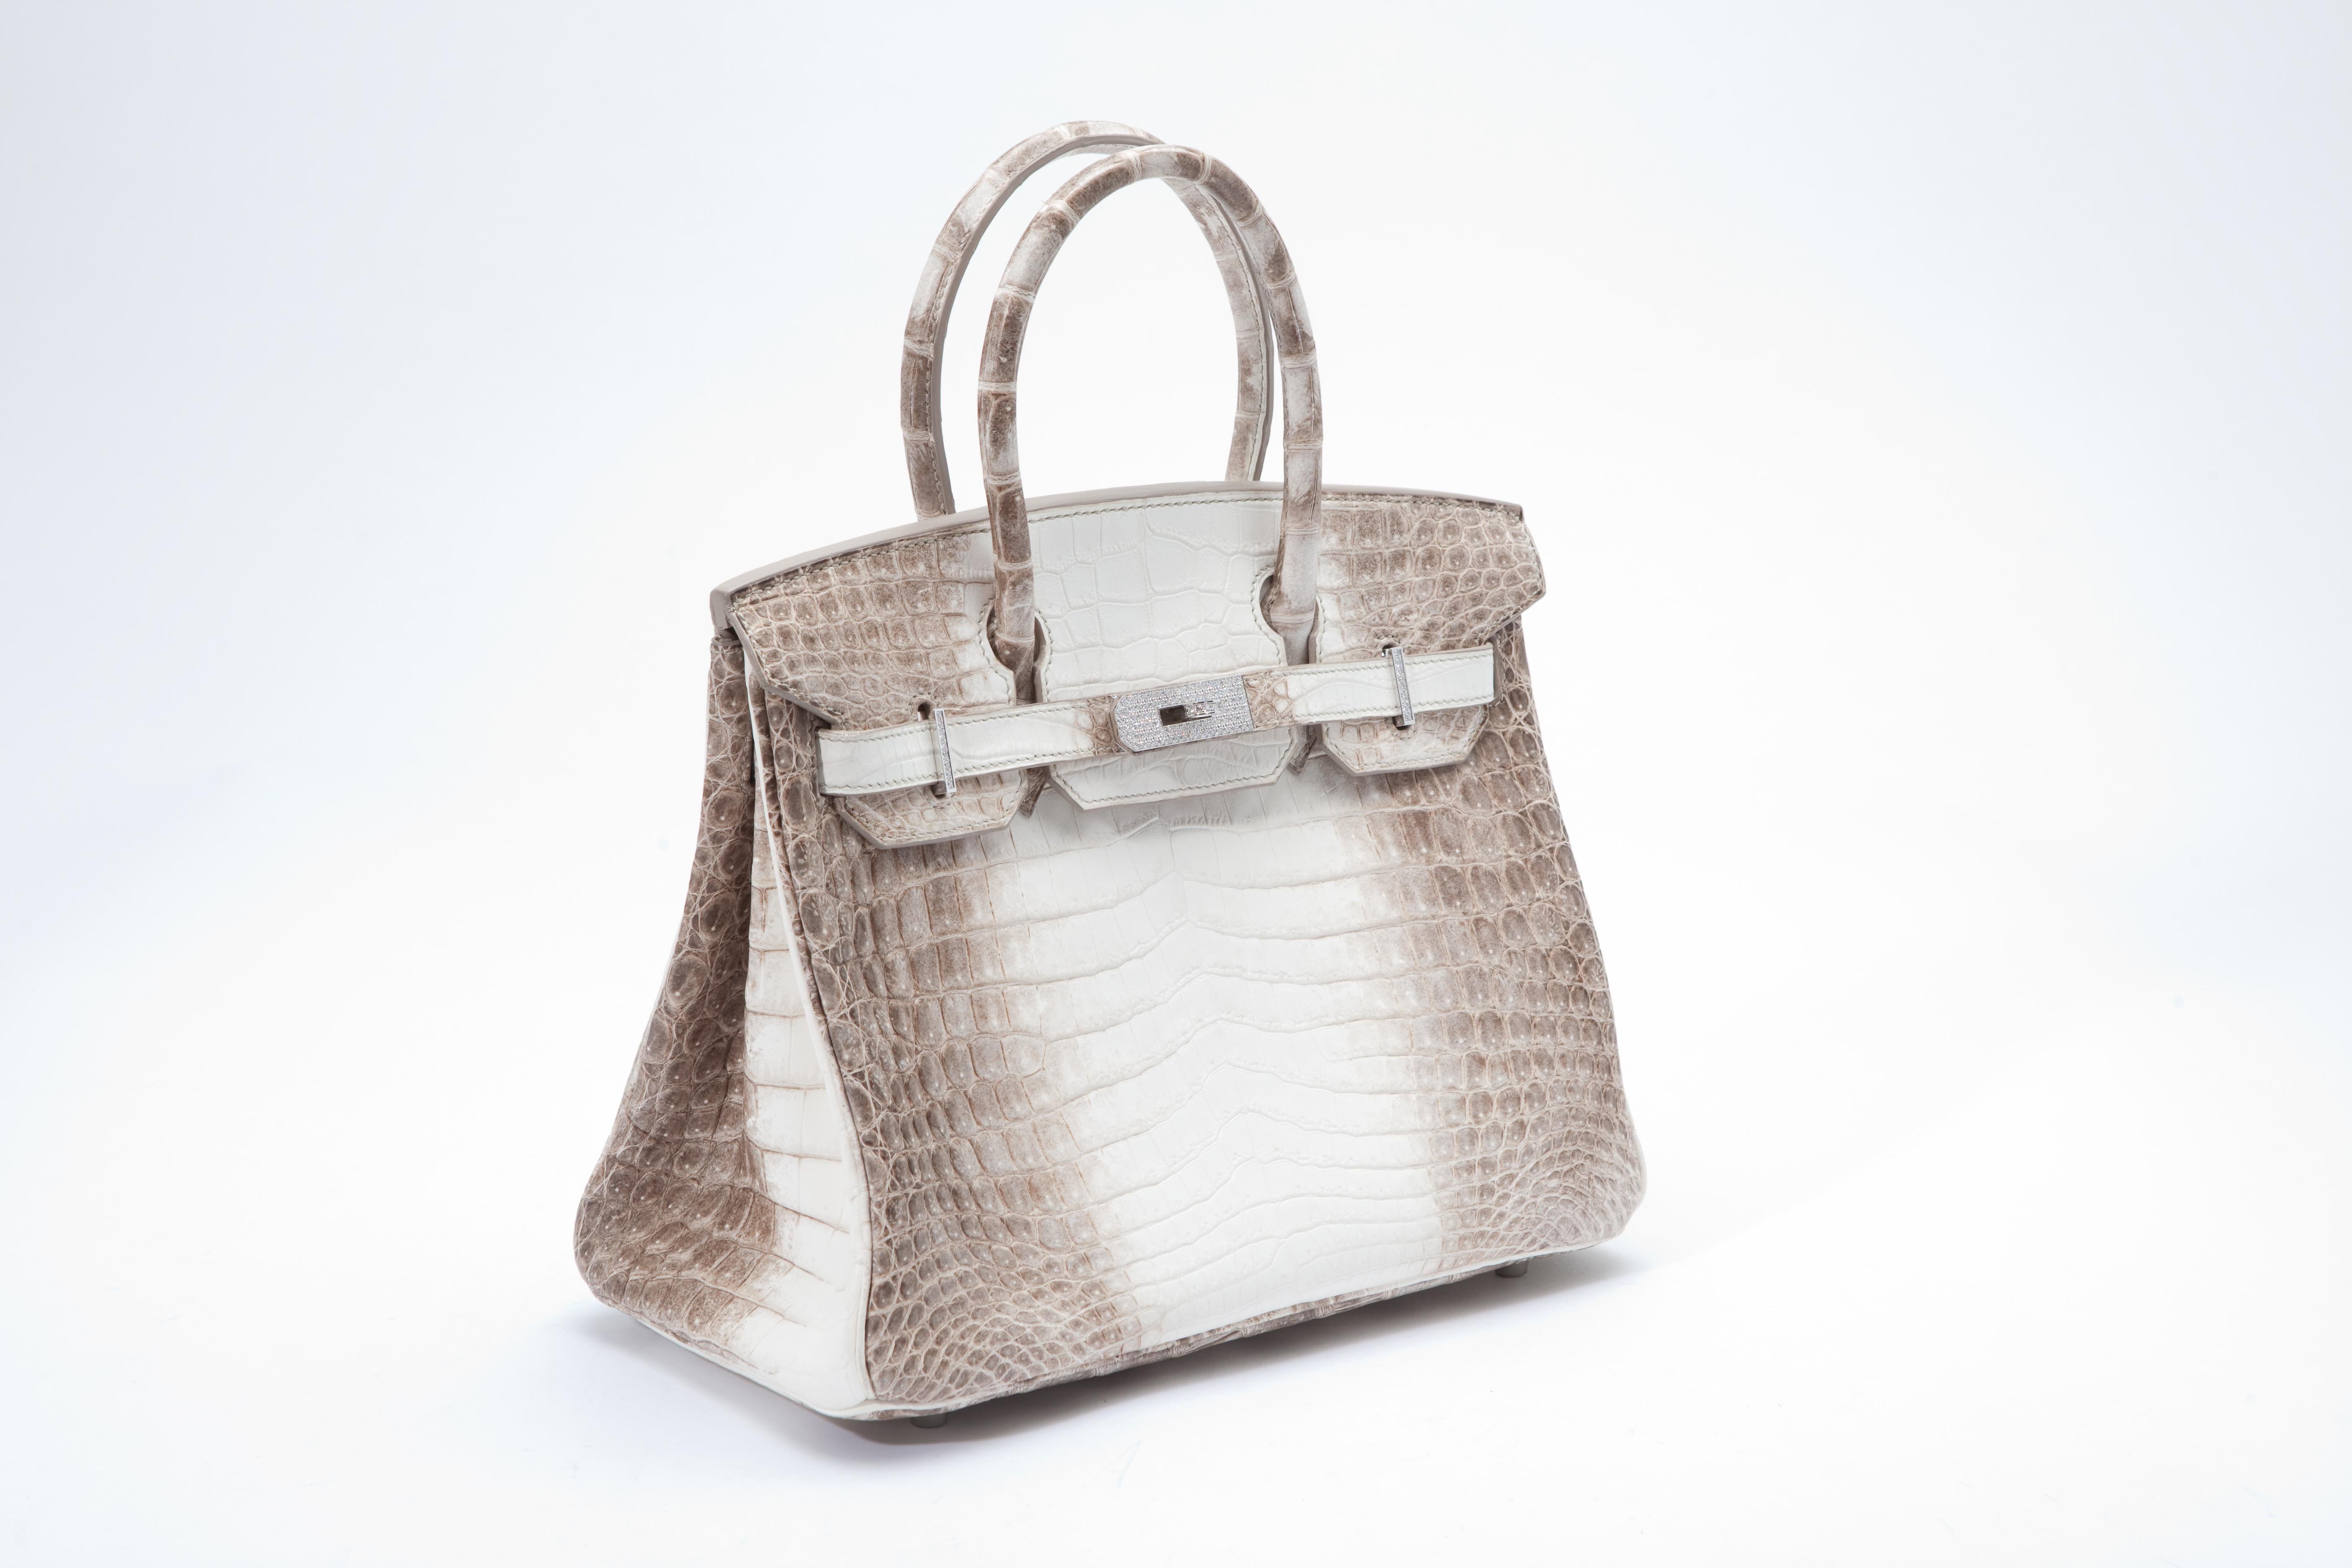 Hermes Birkin 30cm in ultra rare Himalayan crocodile leather with diamond hardware.  Without doubt the world's most coveted handbag. 

Packaged in its original packaging with all applicable CITES documents.

